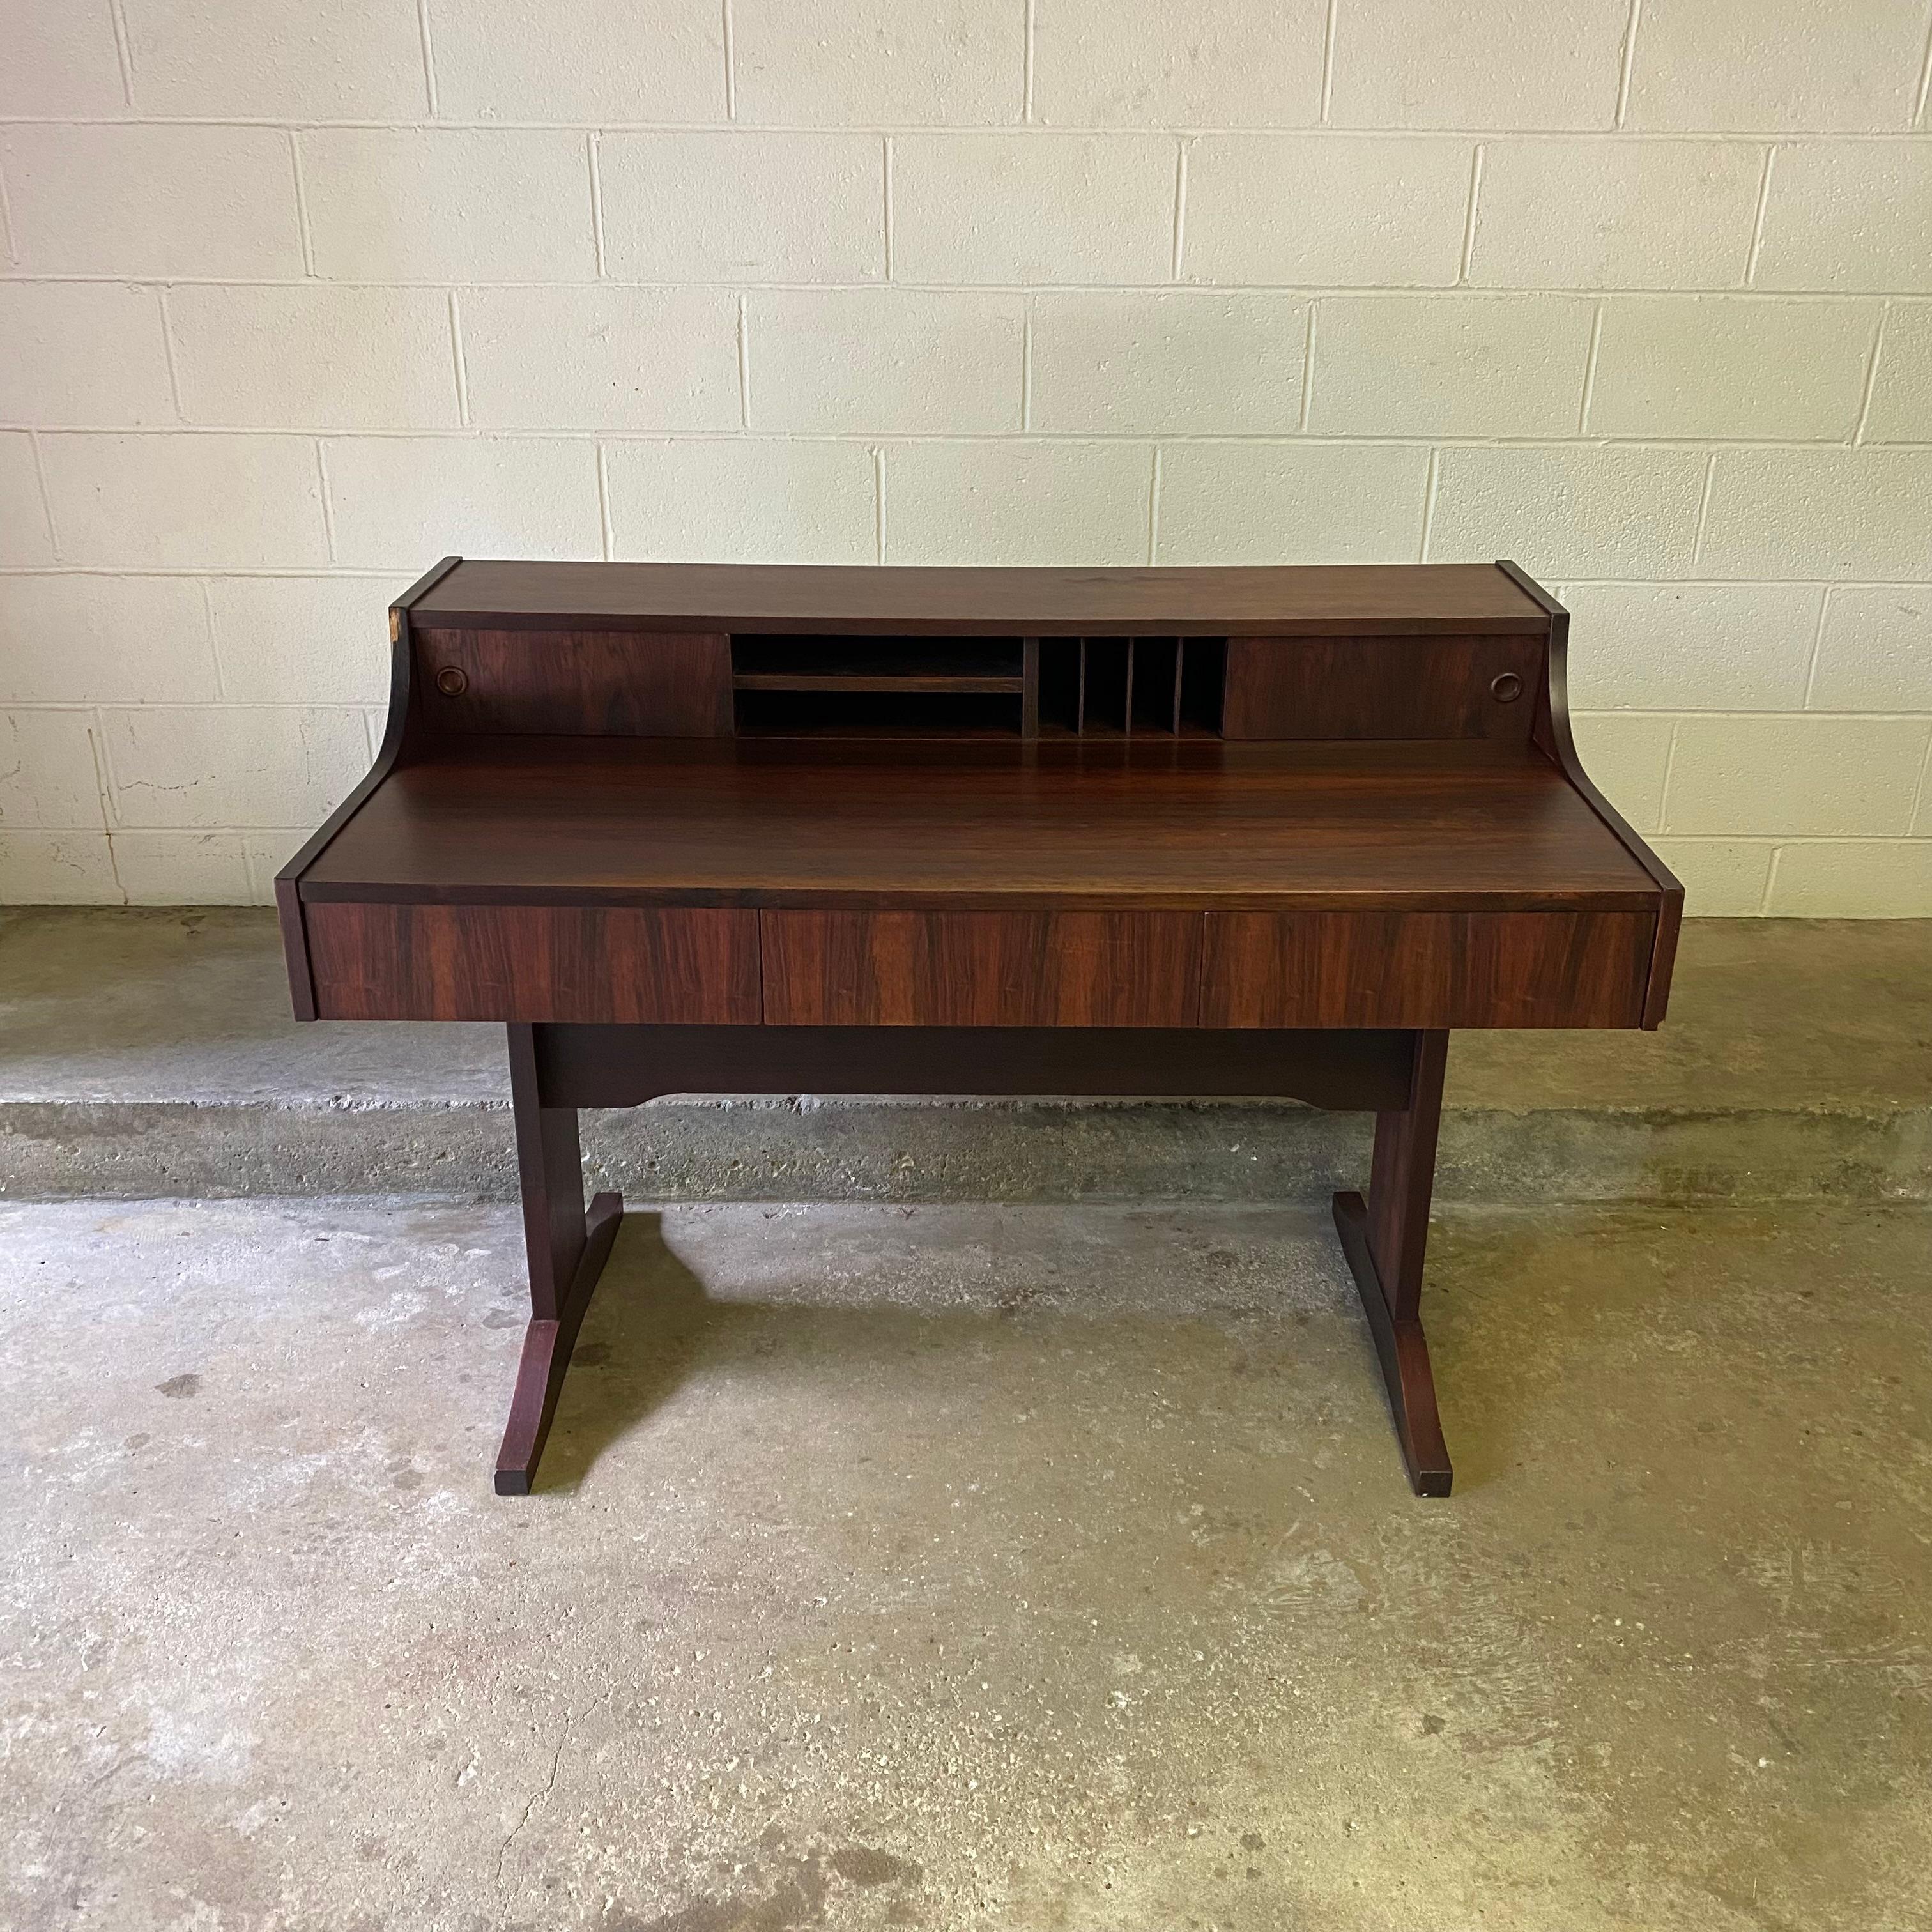 This is a stunning Danish modern rosewood desk with plenty of space for storage and work. There are three large drawers that pull out from the front as well as two sliding doors with finger hole pulls that reveal cubbies.

Condition: this desk is in